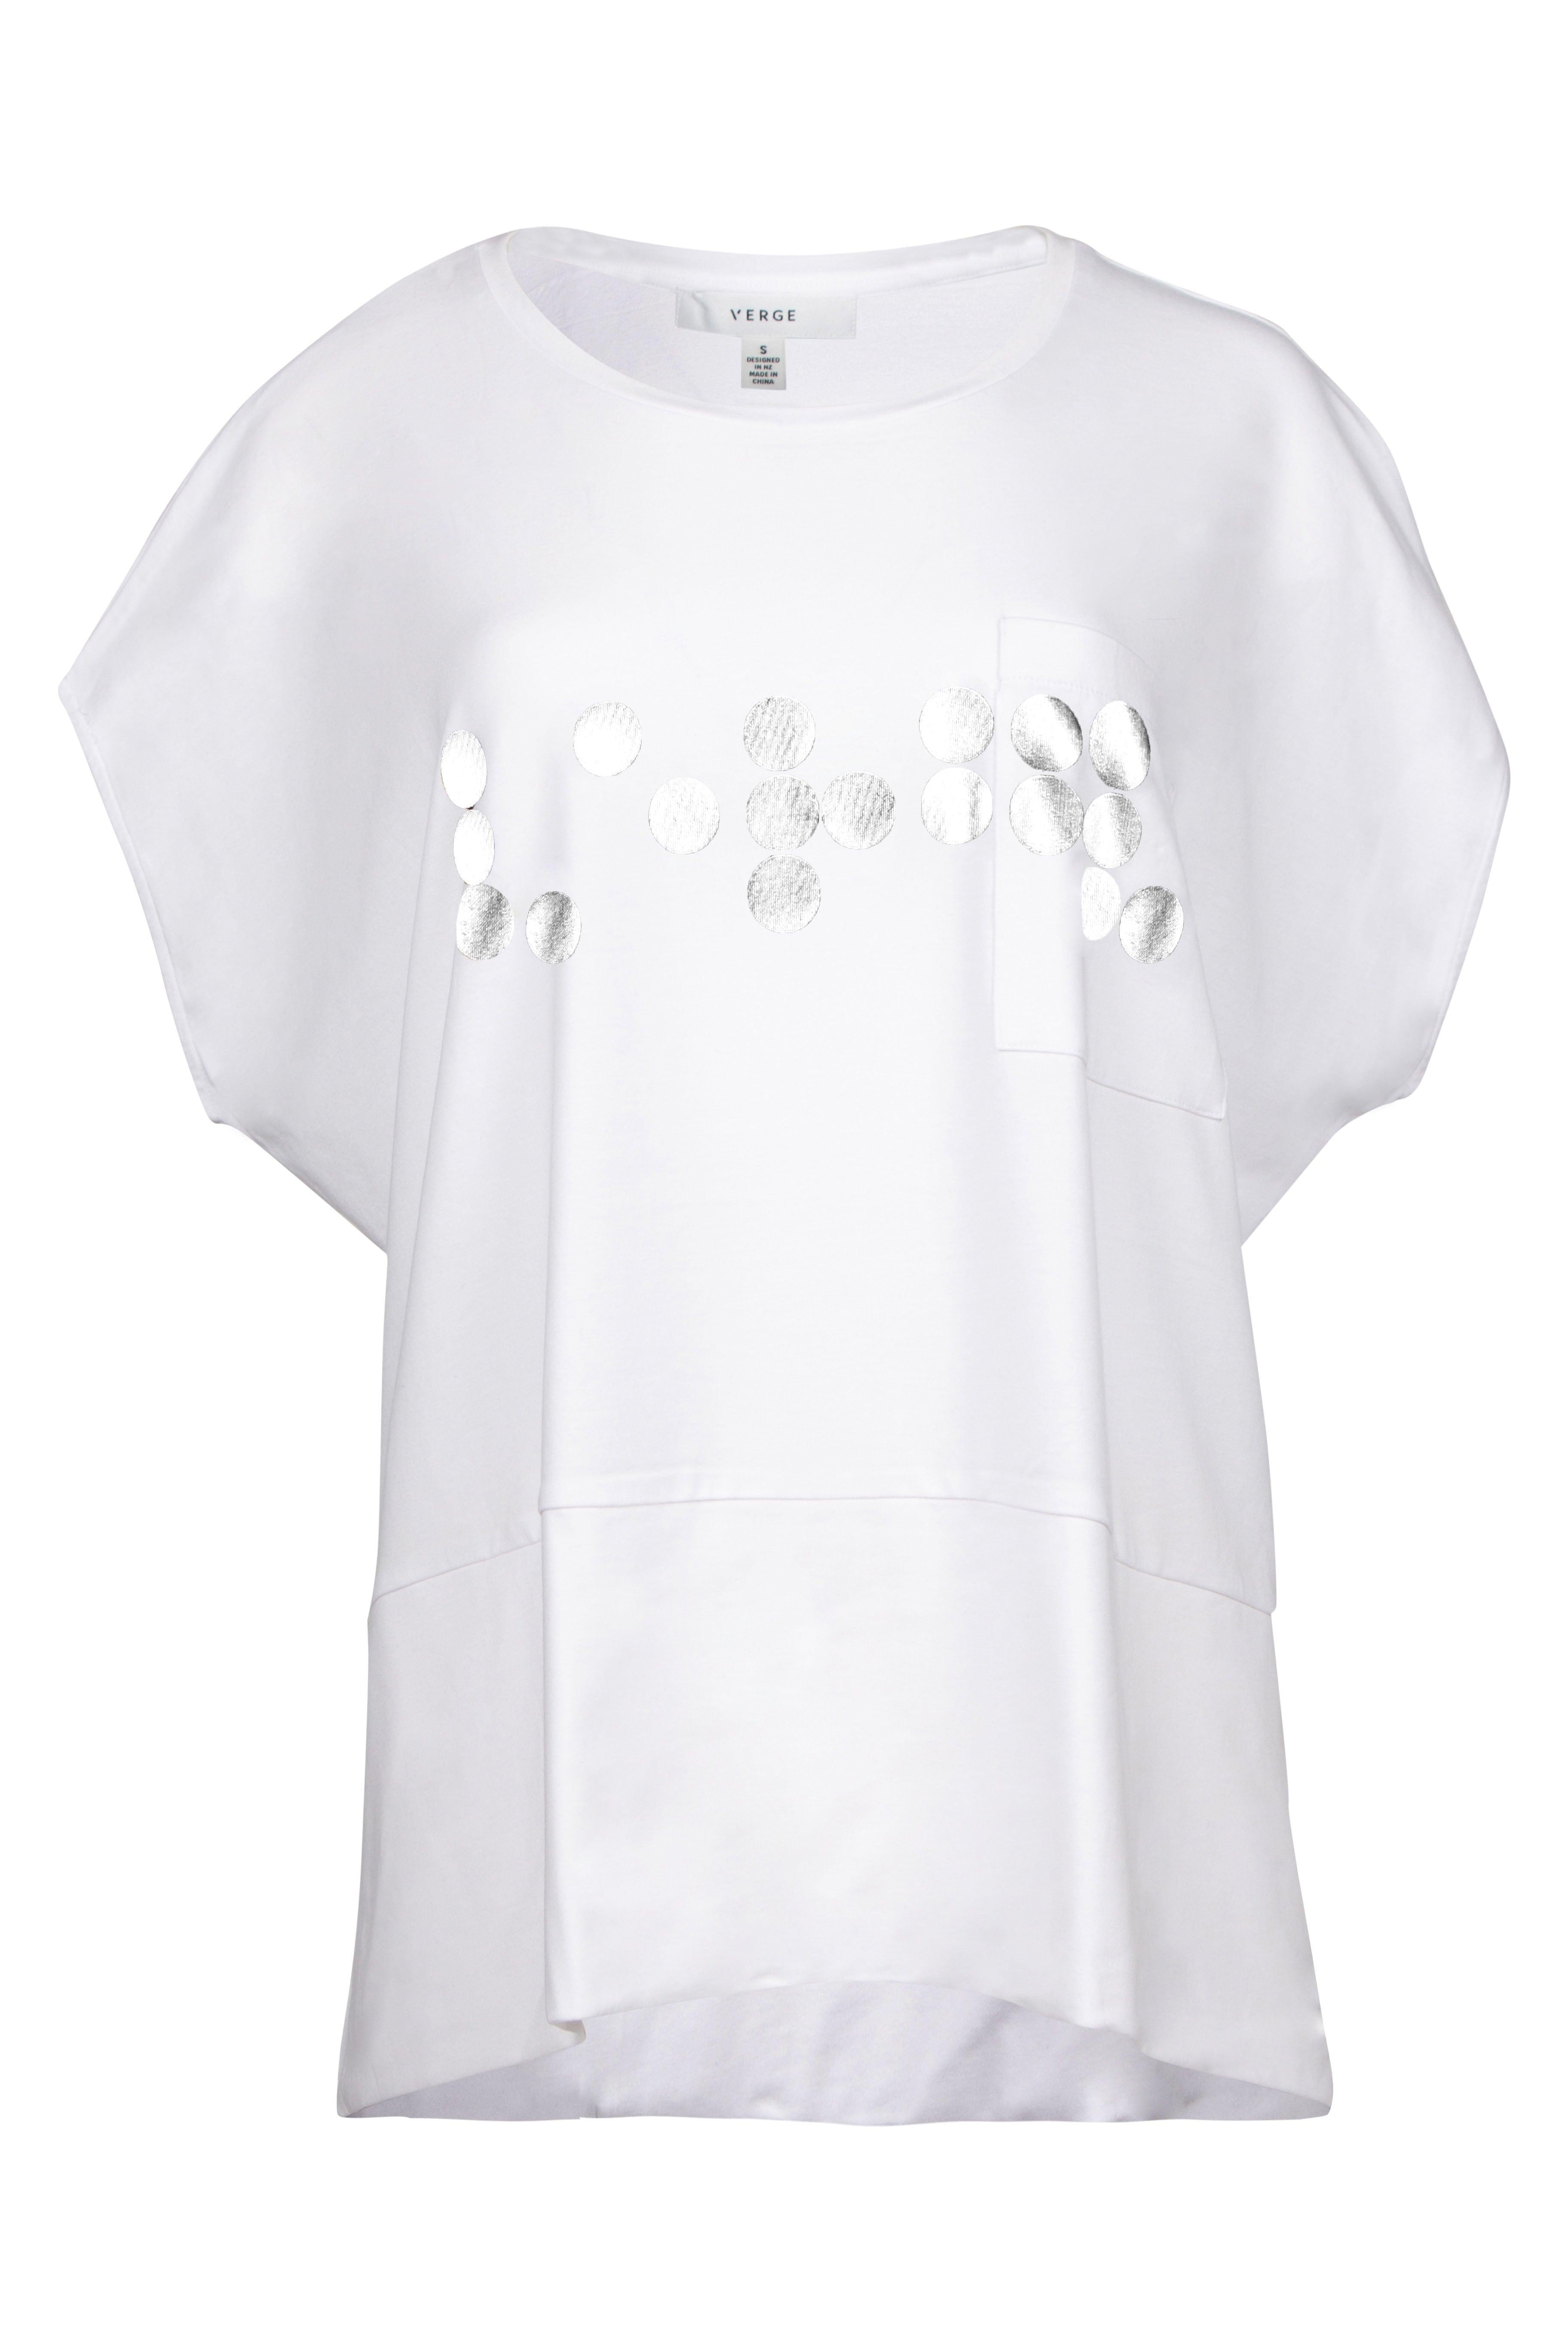 Braille Top - White / Silver - Shirts & Tops VERGE